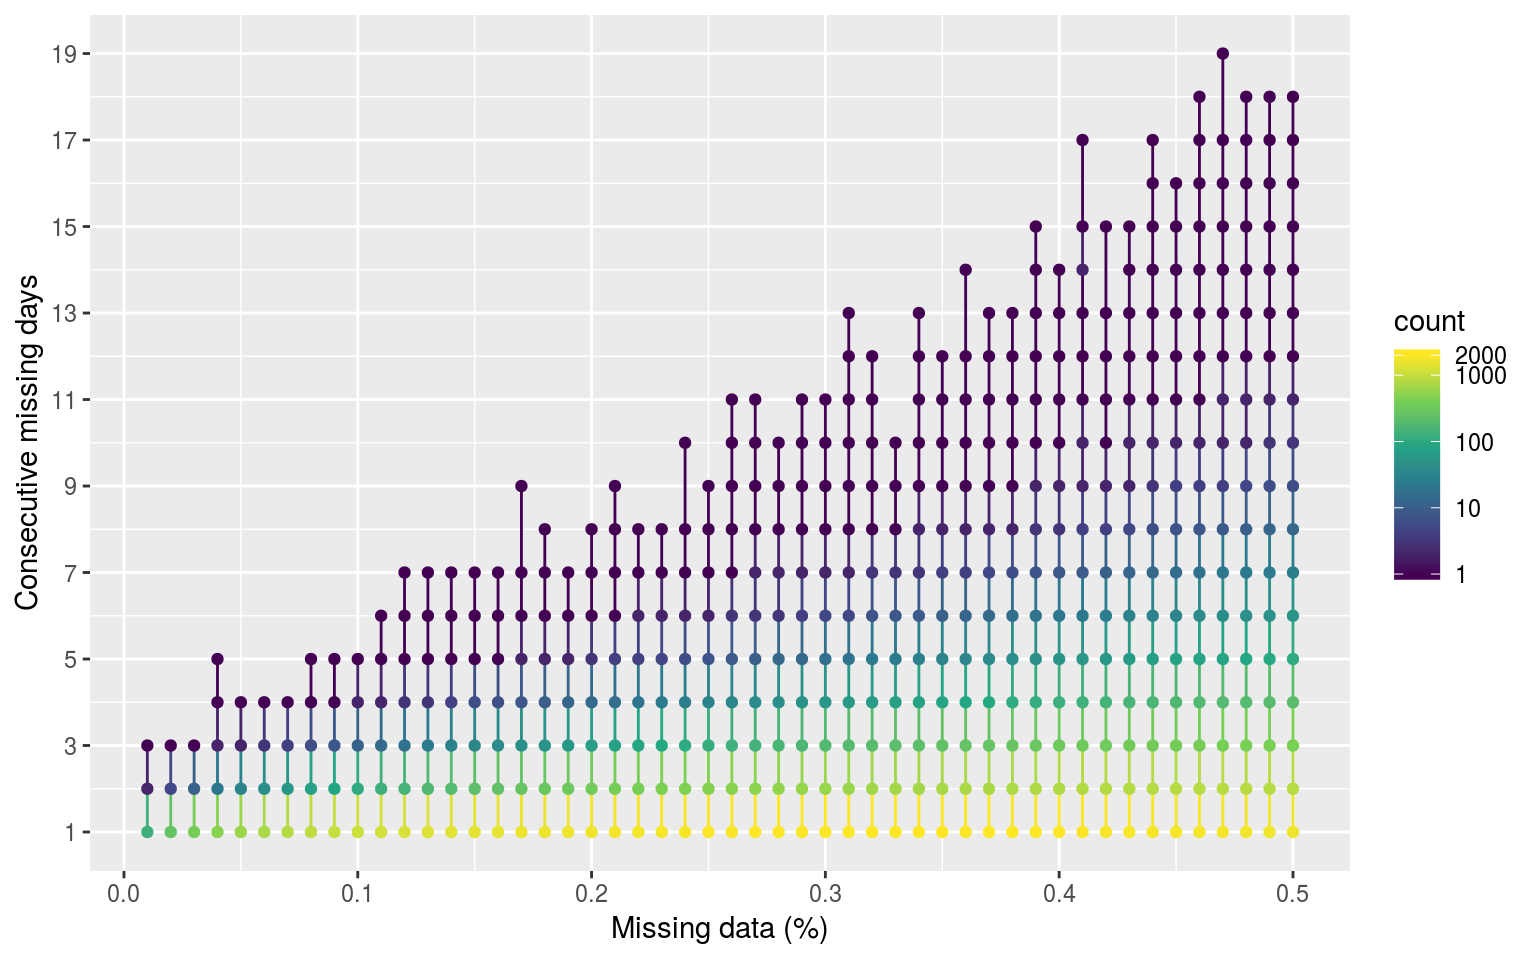 Dot and line plot showing the average count of consecutive missing days of data as the percentage of missing data increases. The colour scale is log transformed.